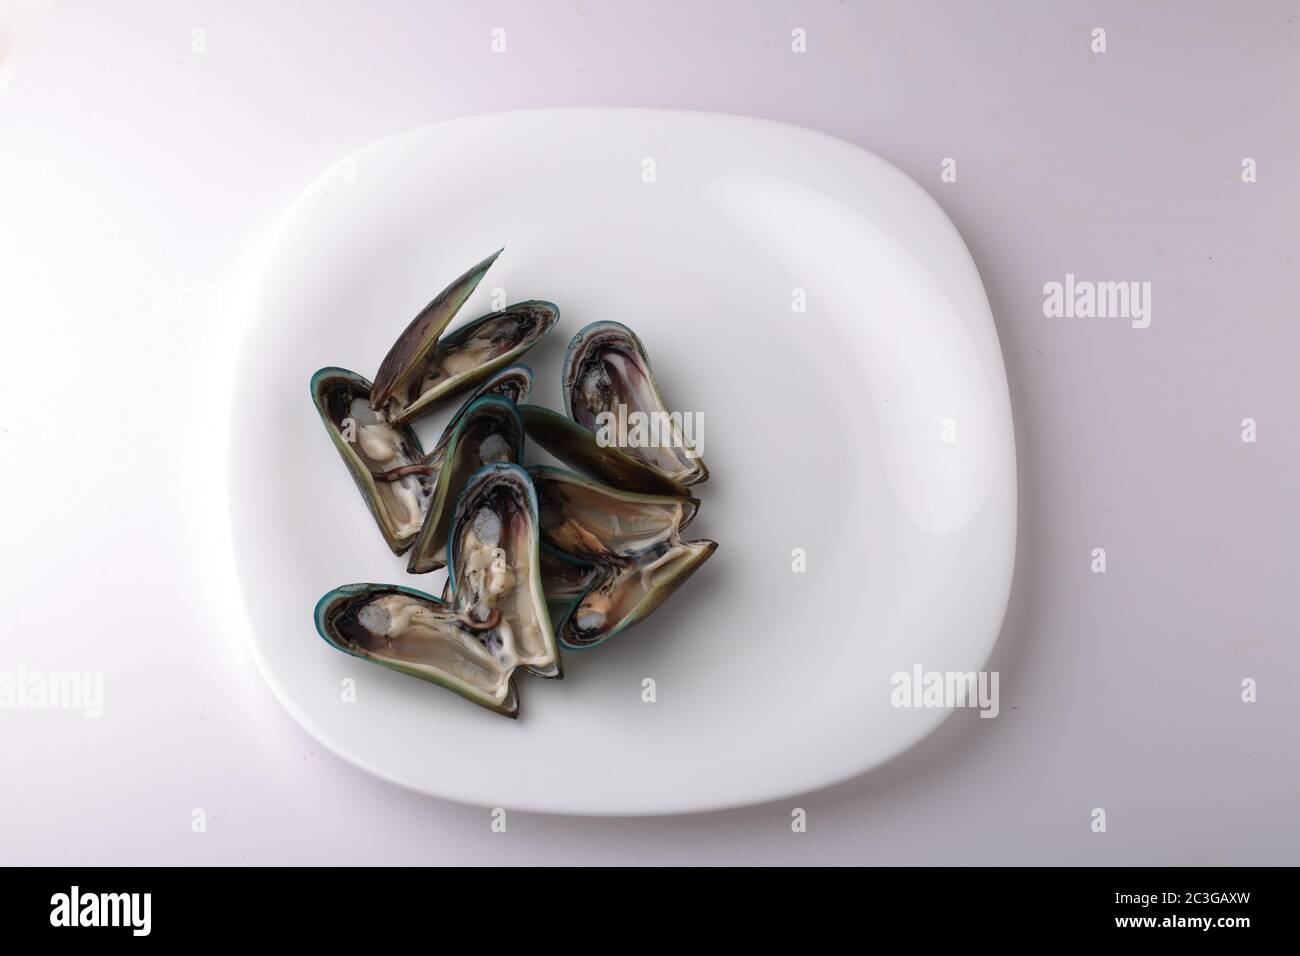 Kerala raw Mussels,kerala raw shell fishes arranged in a white plate with white texture or background Stock Photo